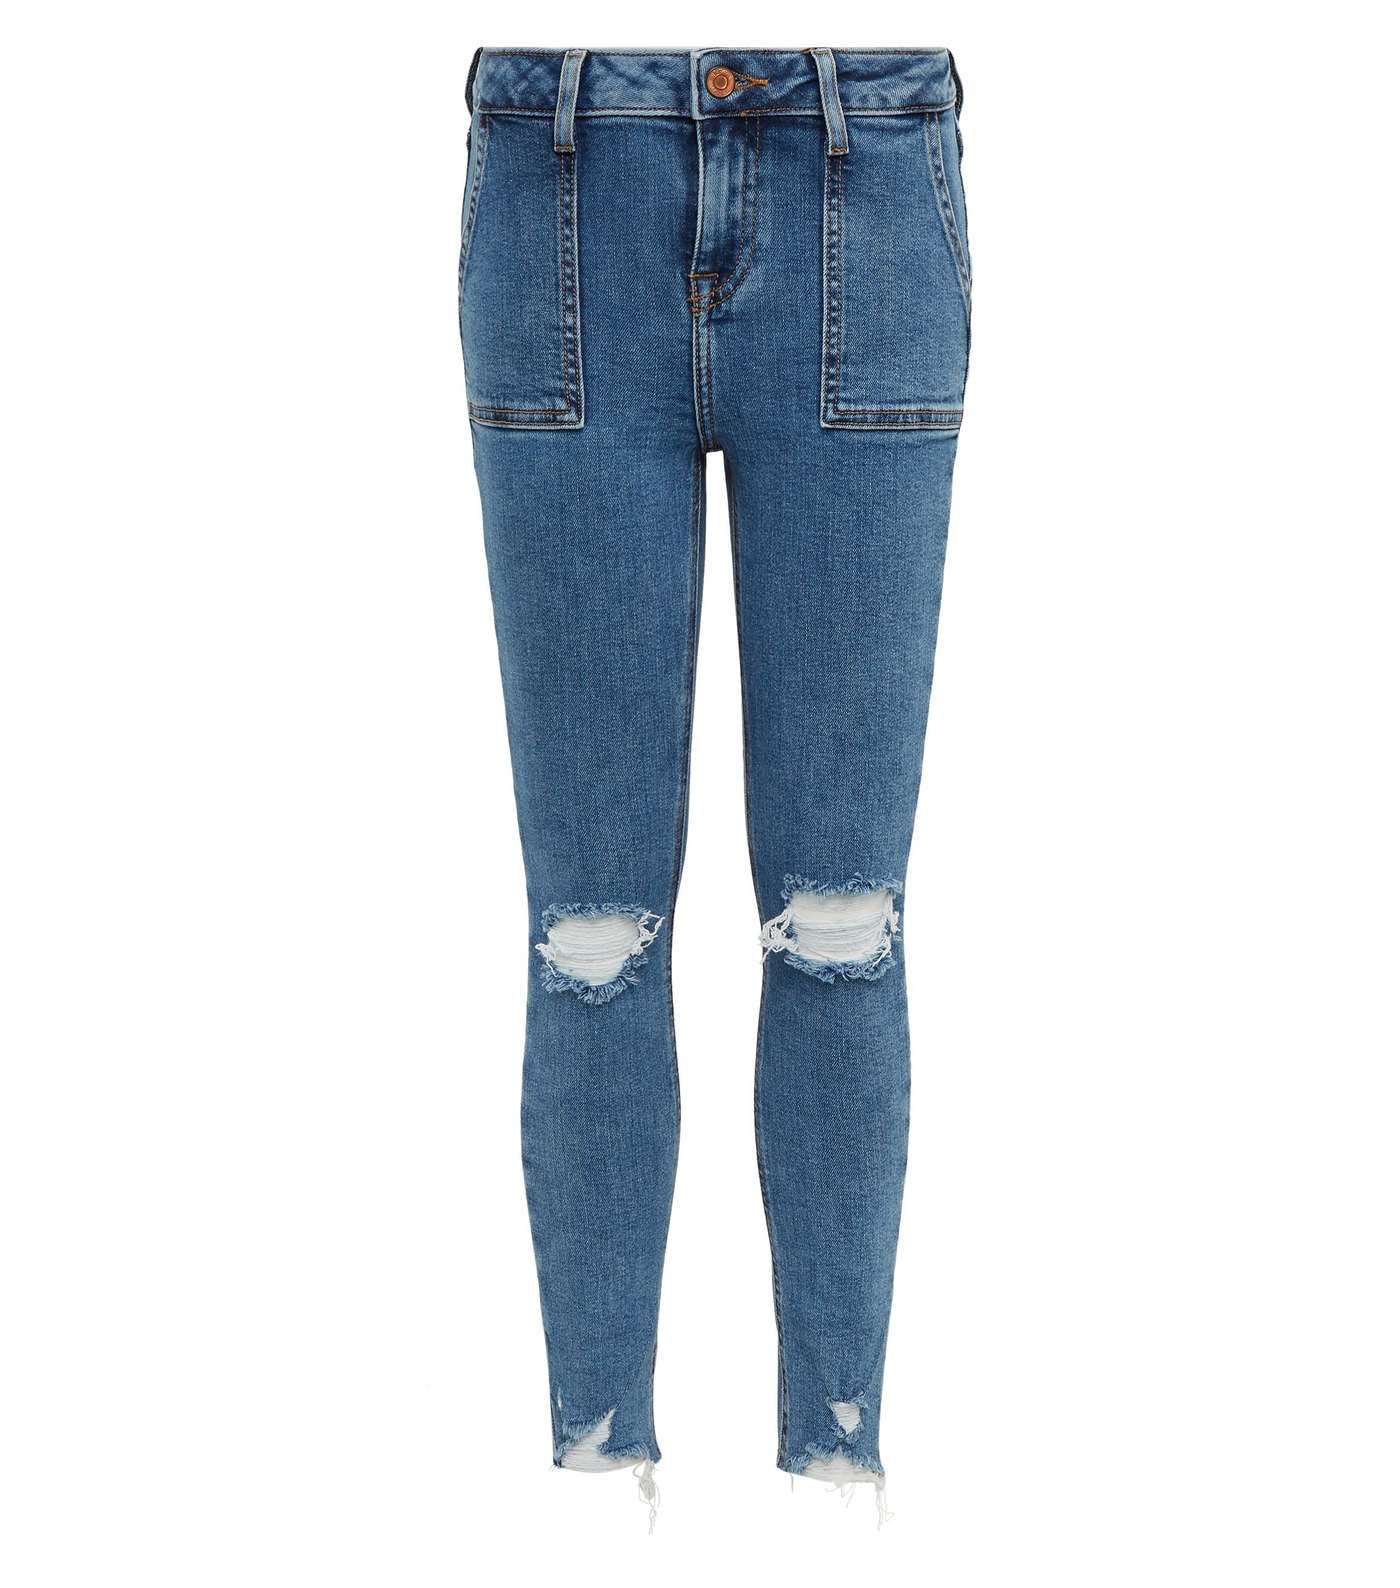 Girls Pale Blue Utility Pocket Ripped Skinny Jeans Image 4